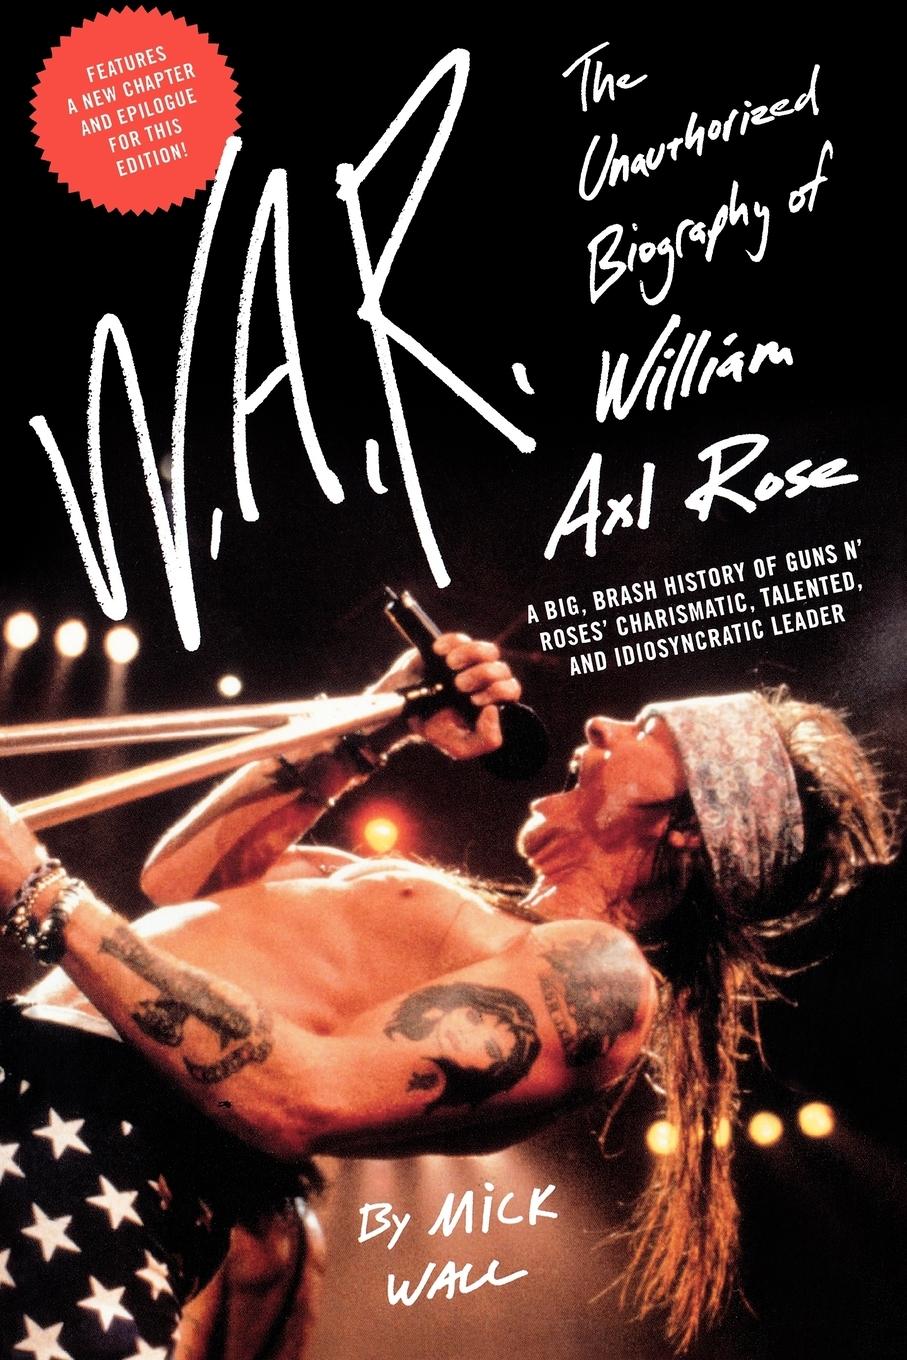 W.A.R. / The Unauthorized Biography of William Axl Rose / Mick Wall / Taschenbuch / Paperback / Englisch / 2009 / St. Martins Press-3PL / EAN 9780312541484 - Wall, Mick